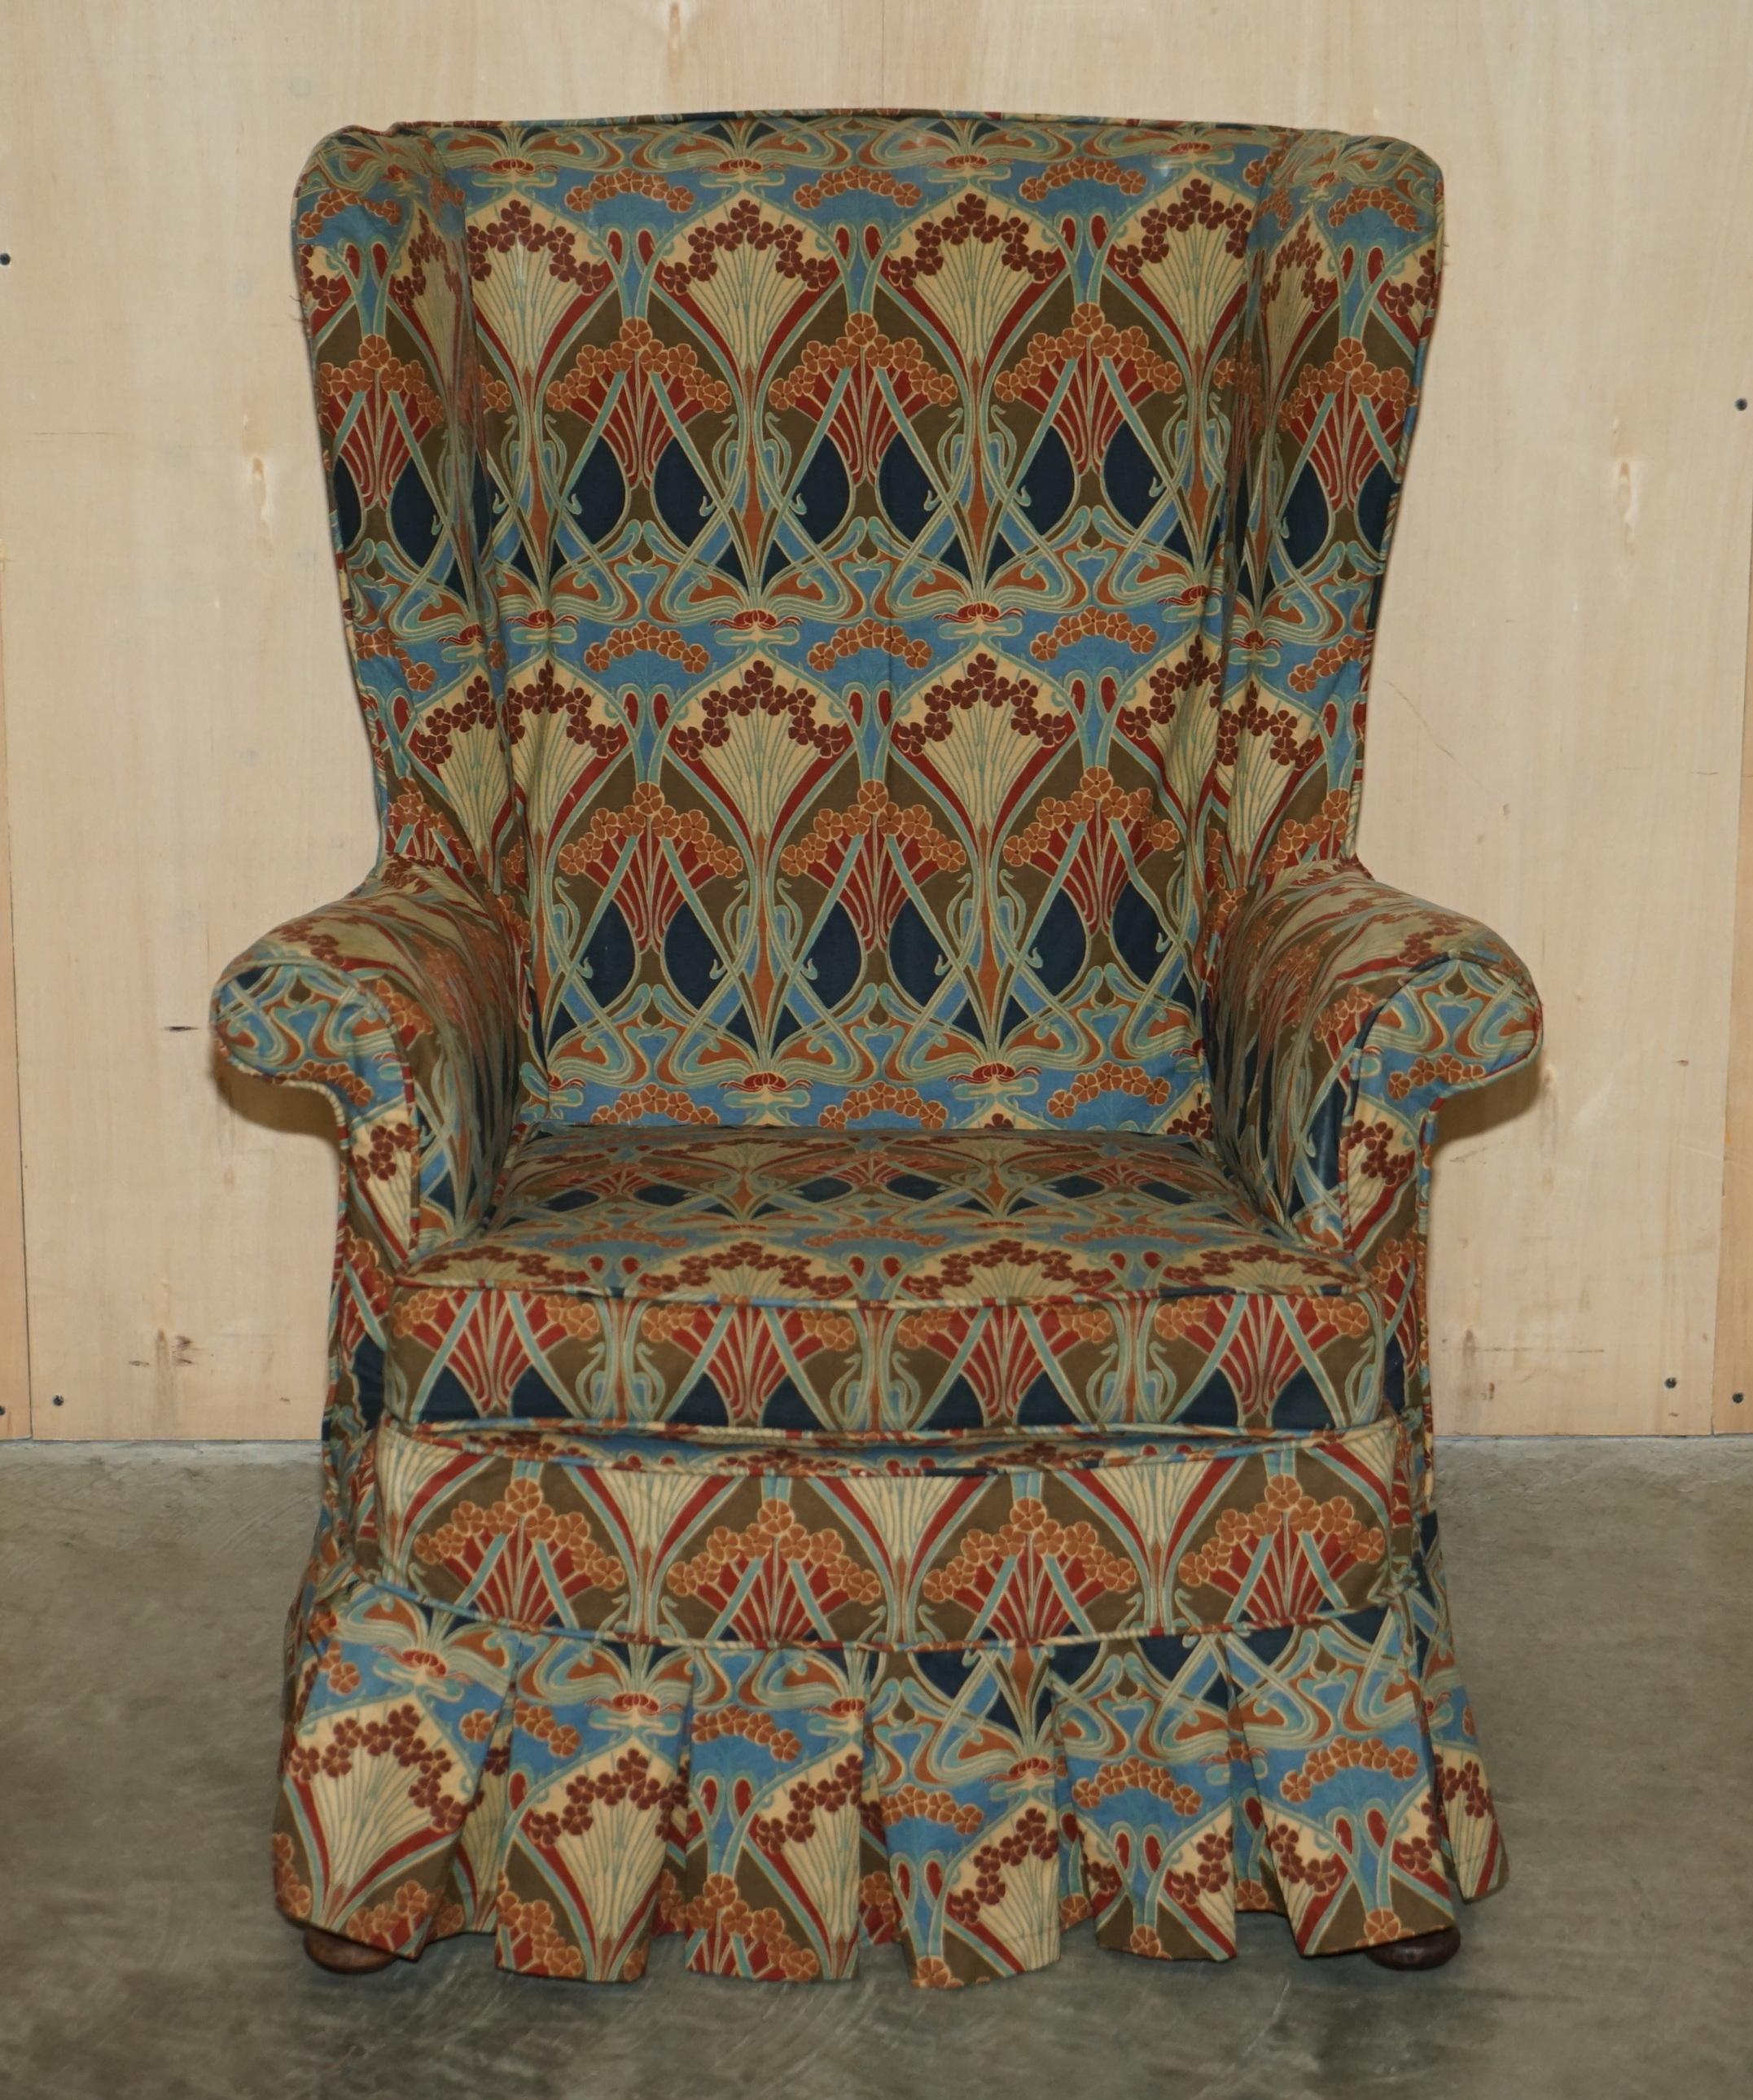 Royal House Antiques

Royal House Antiques is delighted to offer for sale absolutely stunning vintage circa 1930's English Wingback armchair with removable Liberty's London Ianthe fabric cover 

Please note the delivery fee listed is just a guide,